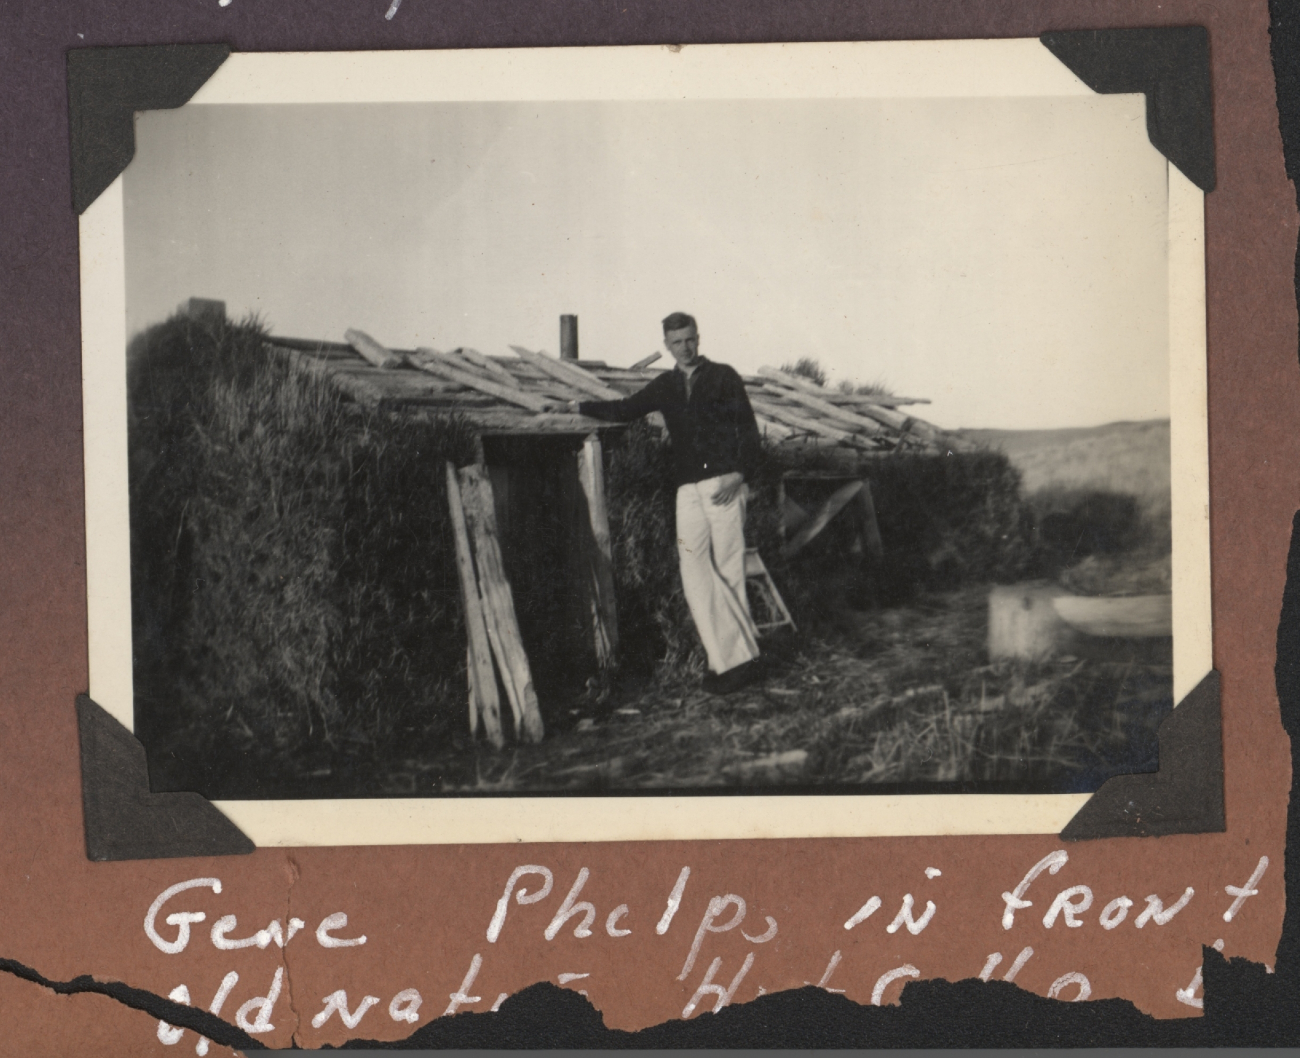 Gene Phelps in front of an old native Aleut hut